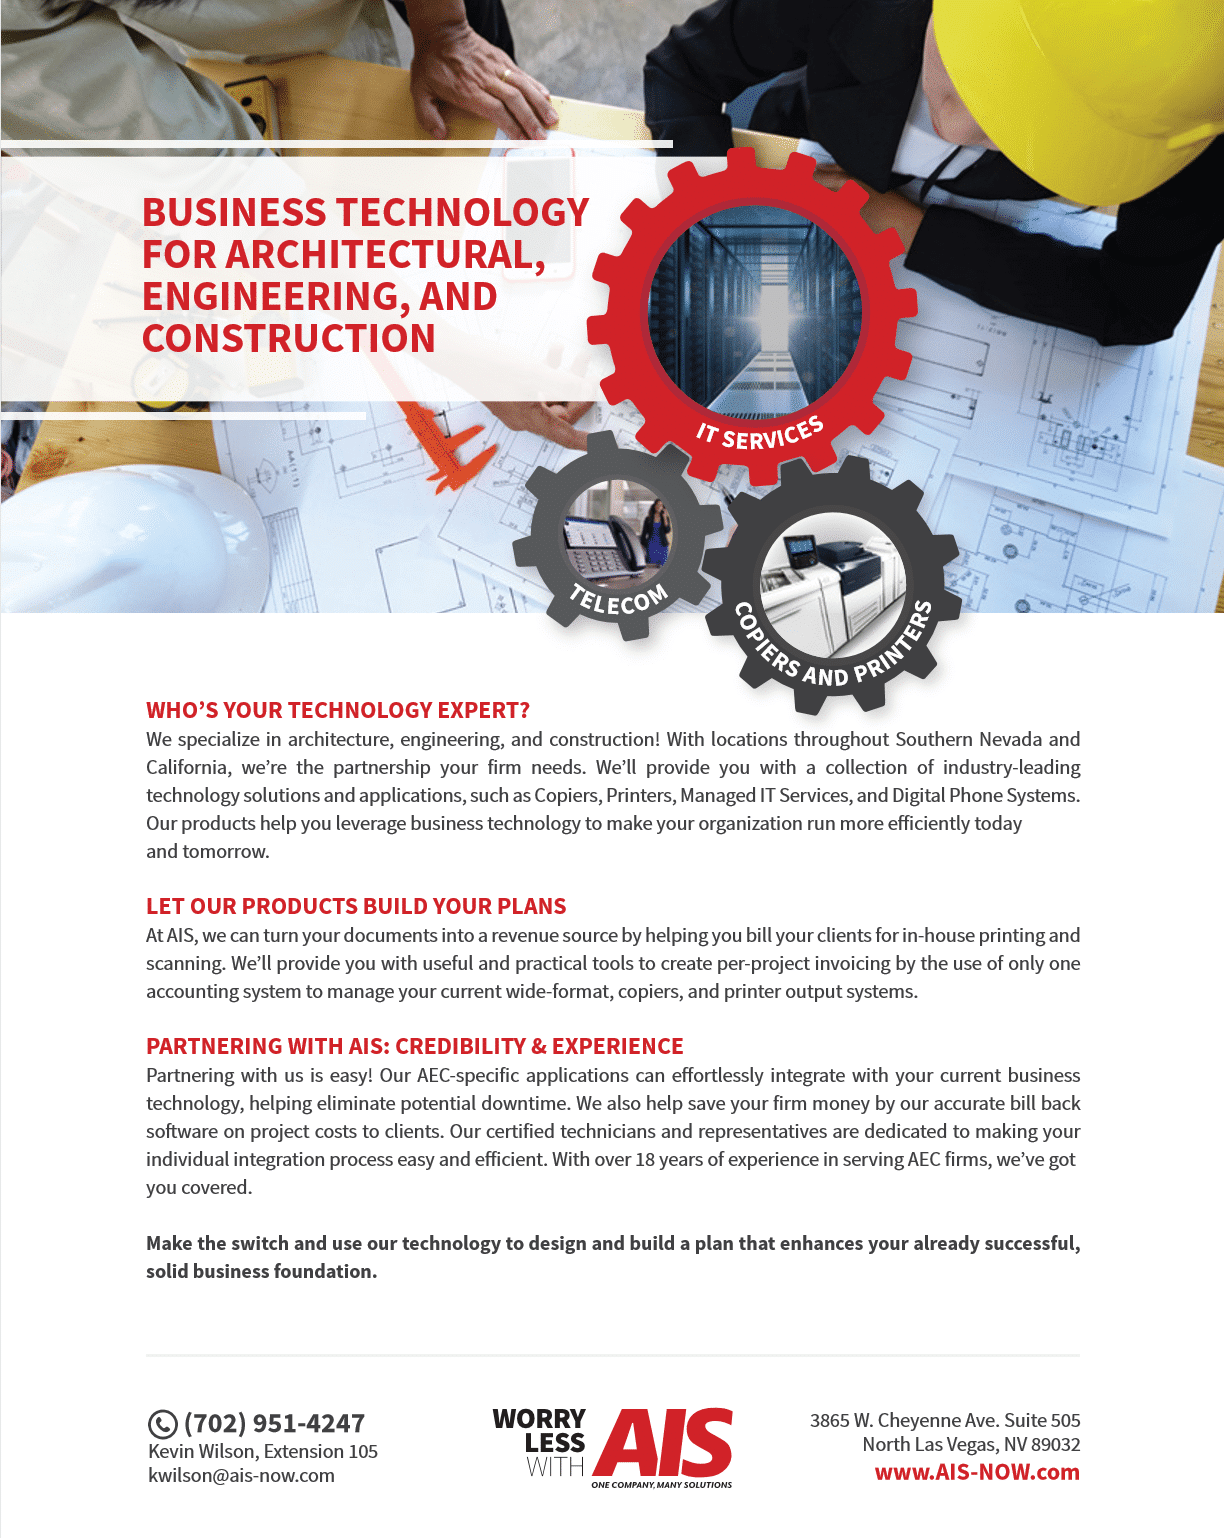 Business technology for Architectural, Engineering, and Construction